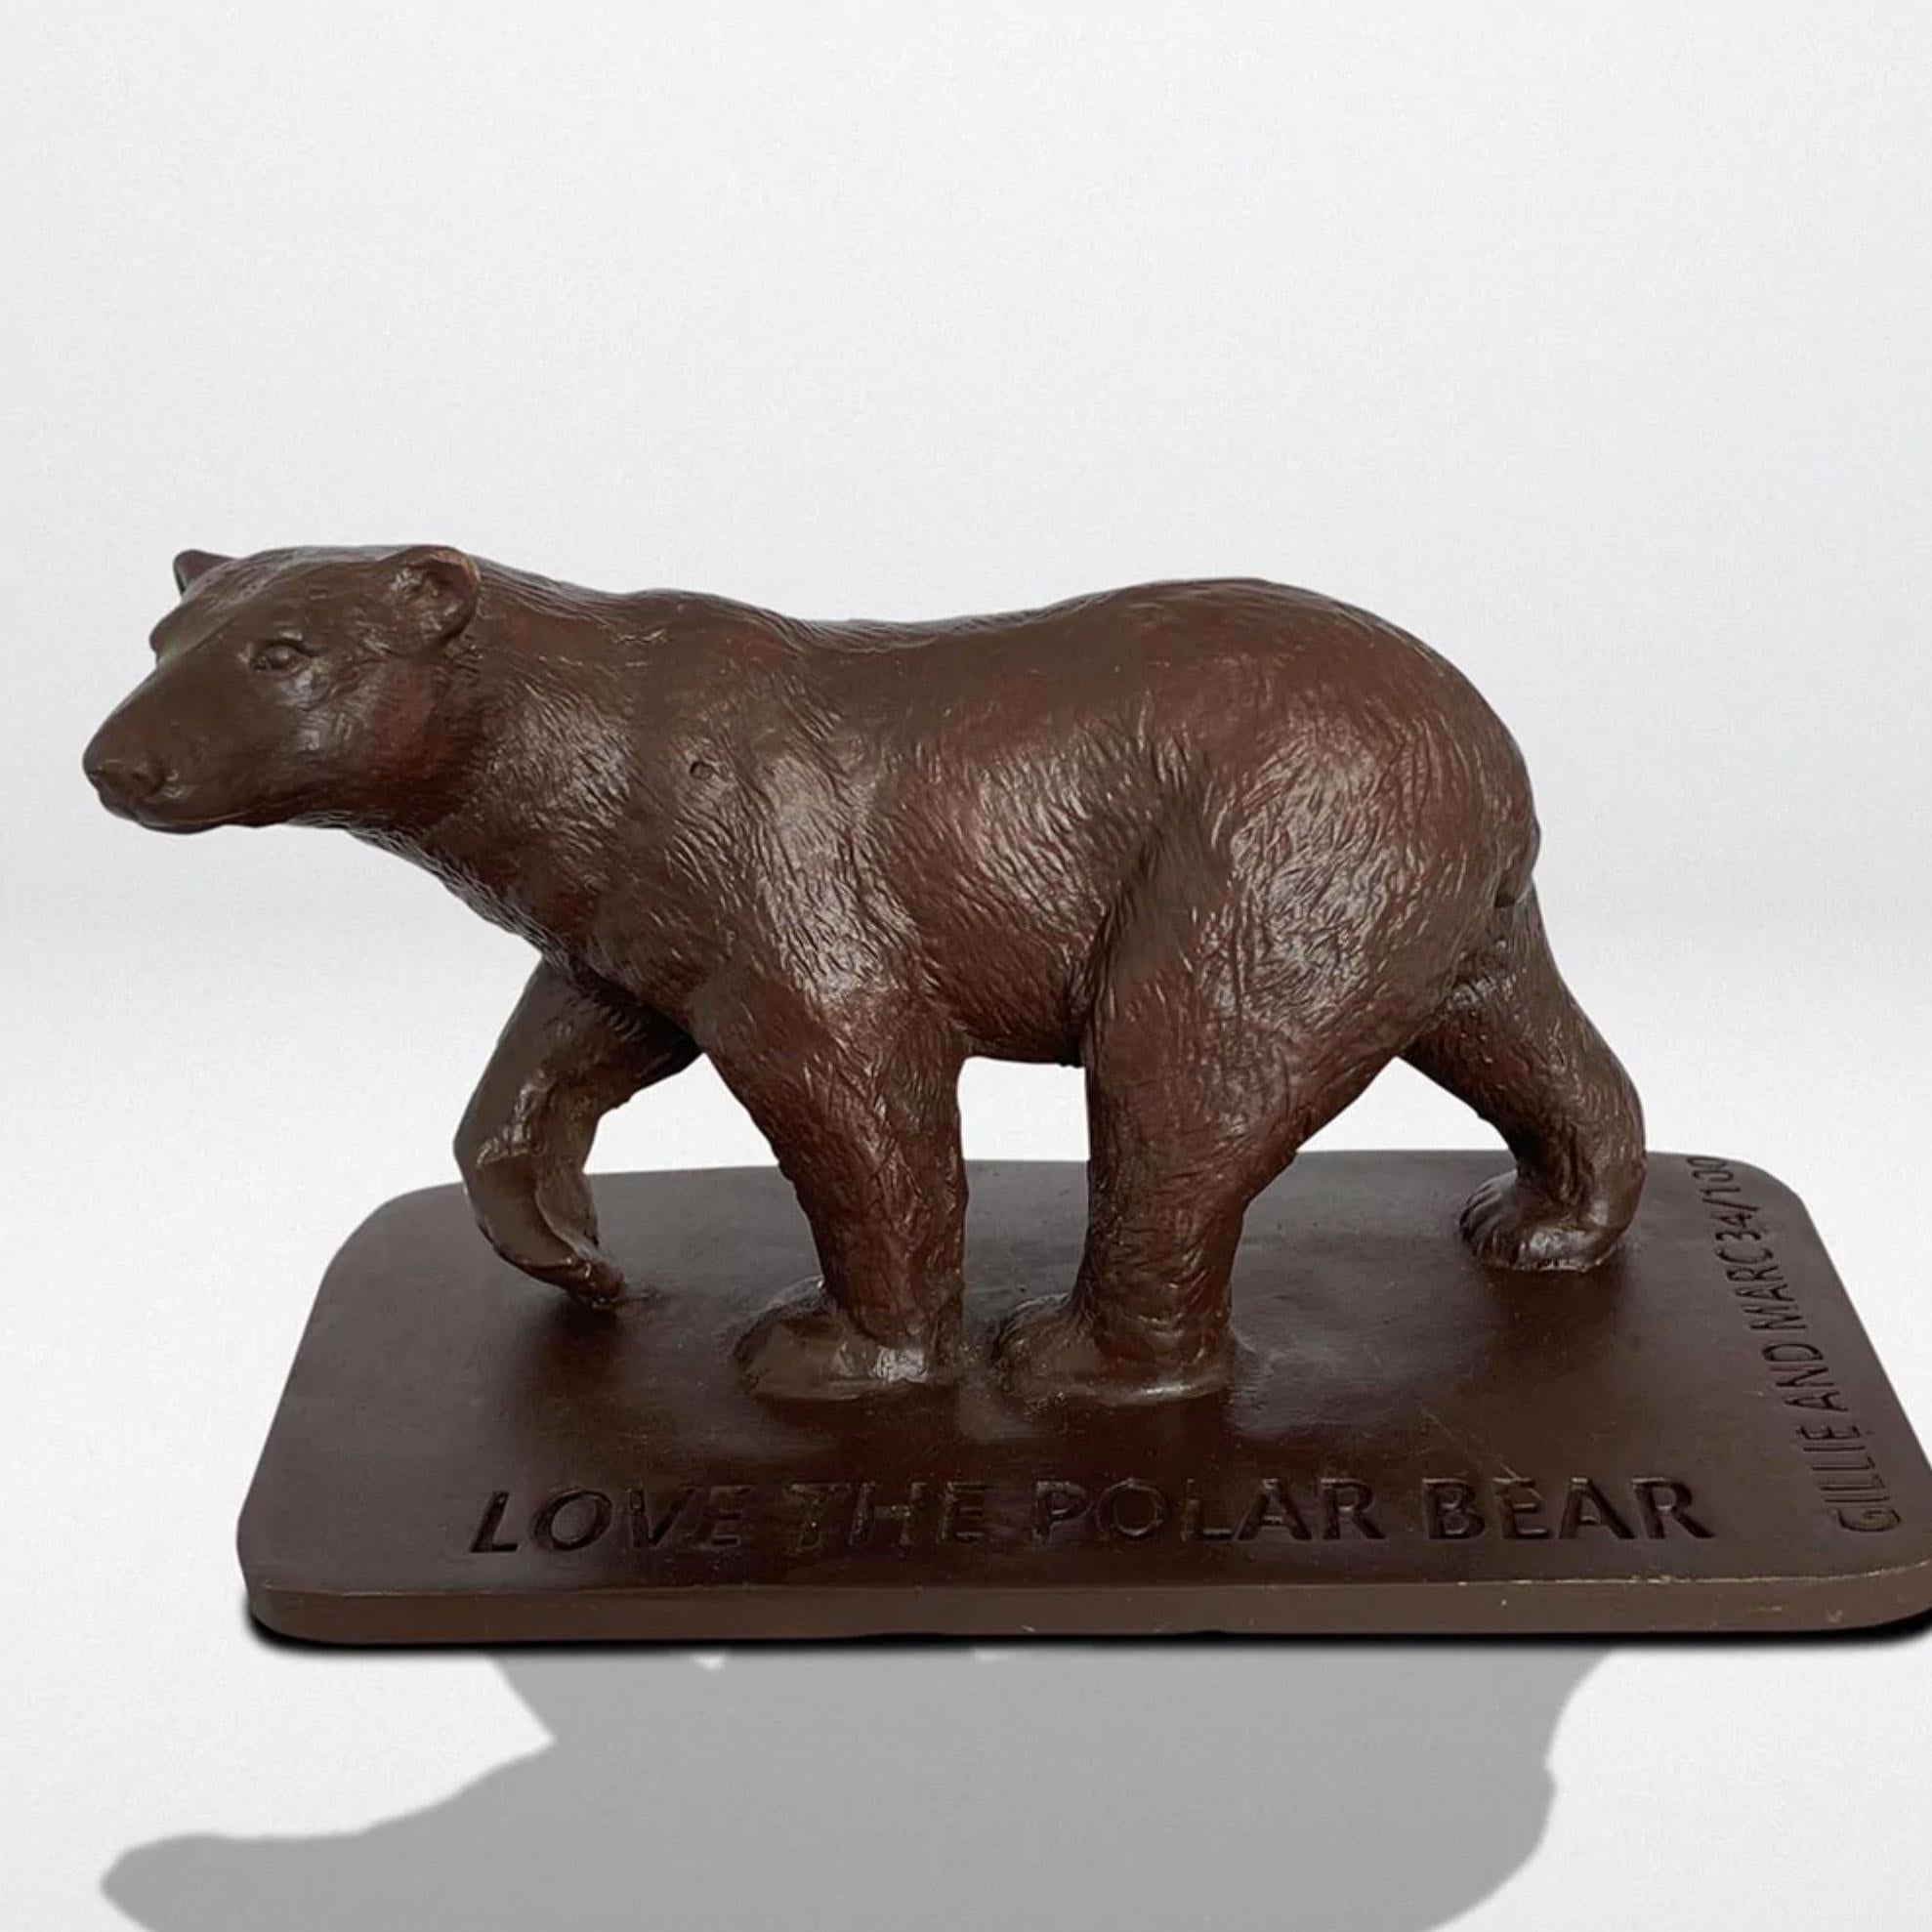 Authentic Bronze Love the Polar Bear Pocket Sculpture by Gillie and Marc For Sale 3